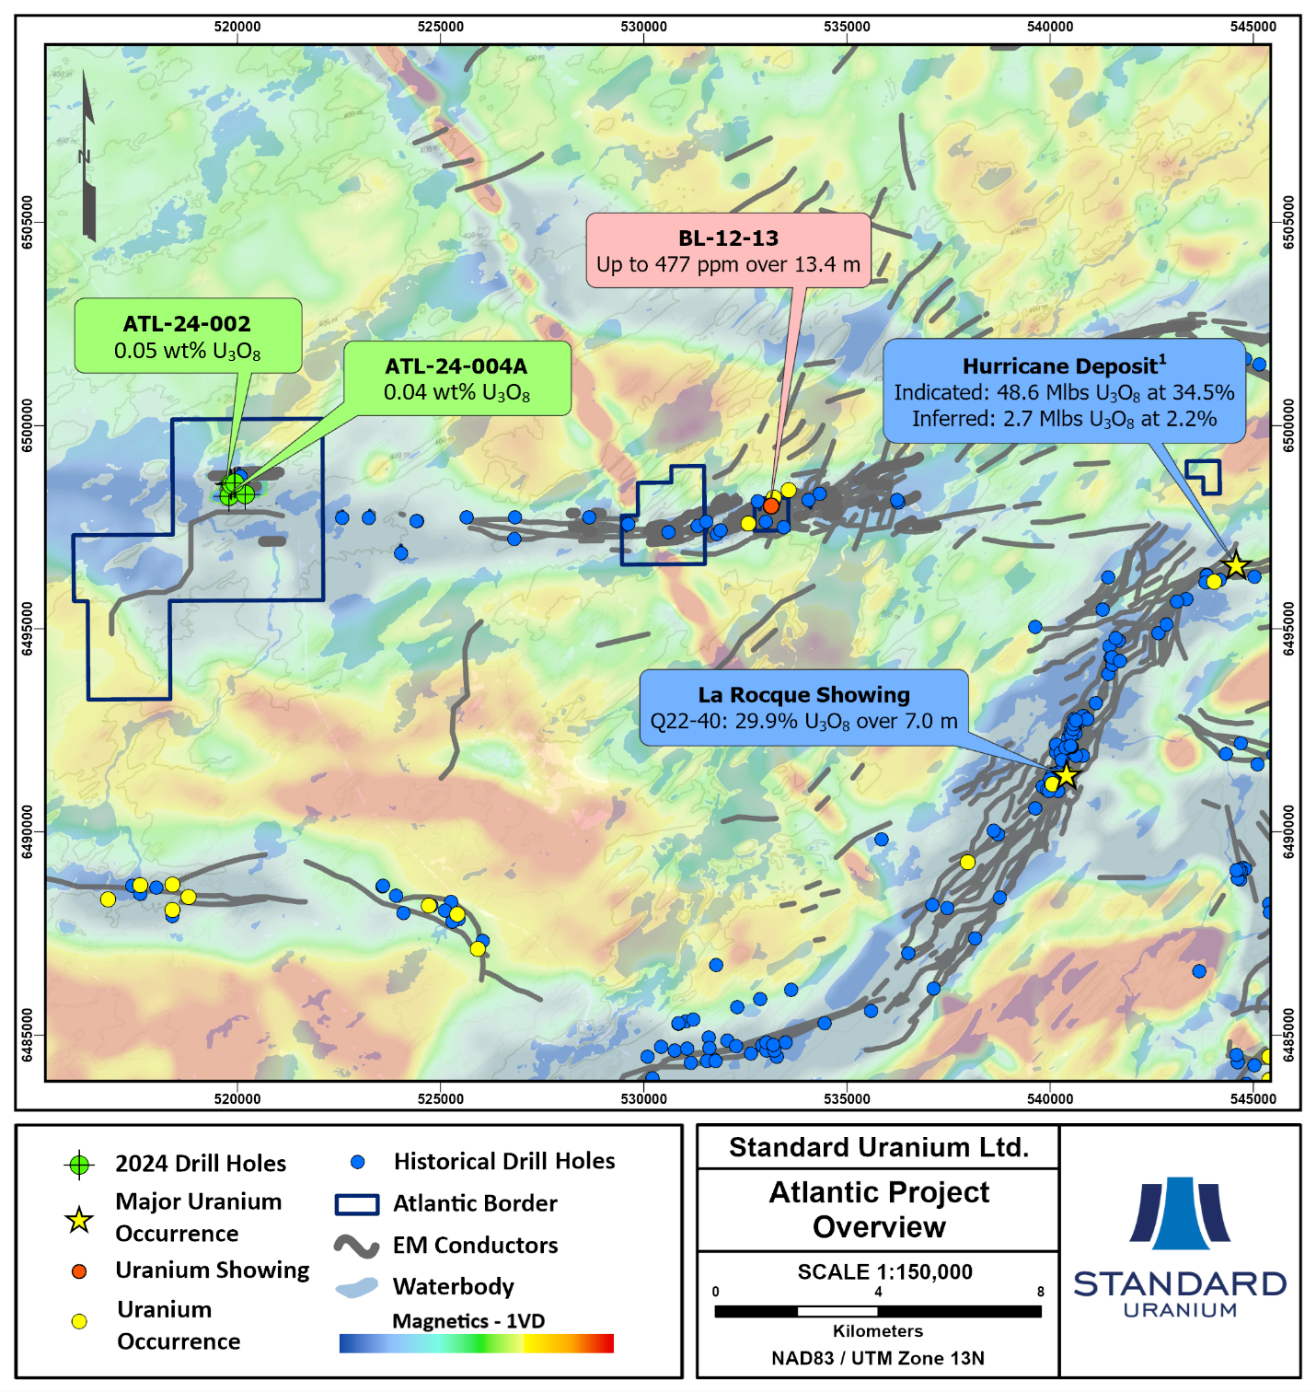 Standard Uranium Confirms Uranium Mineralization in Multiple Drill Holes at Atlantic Project; Provides Analytical Highlights from Winter Drill Program